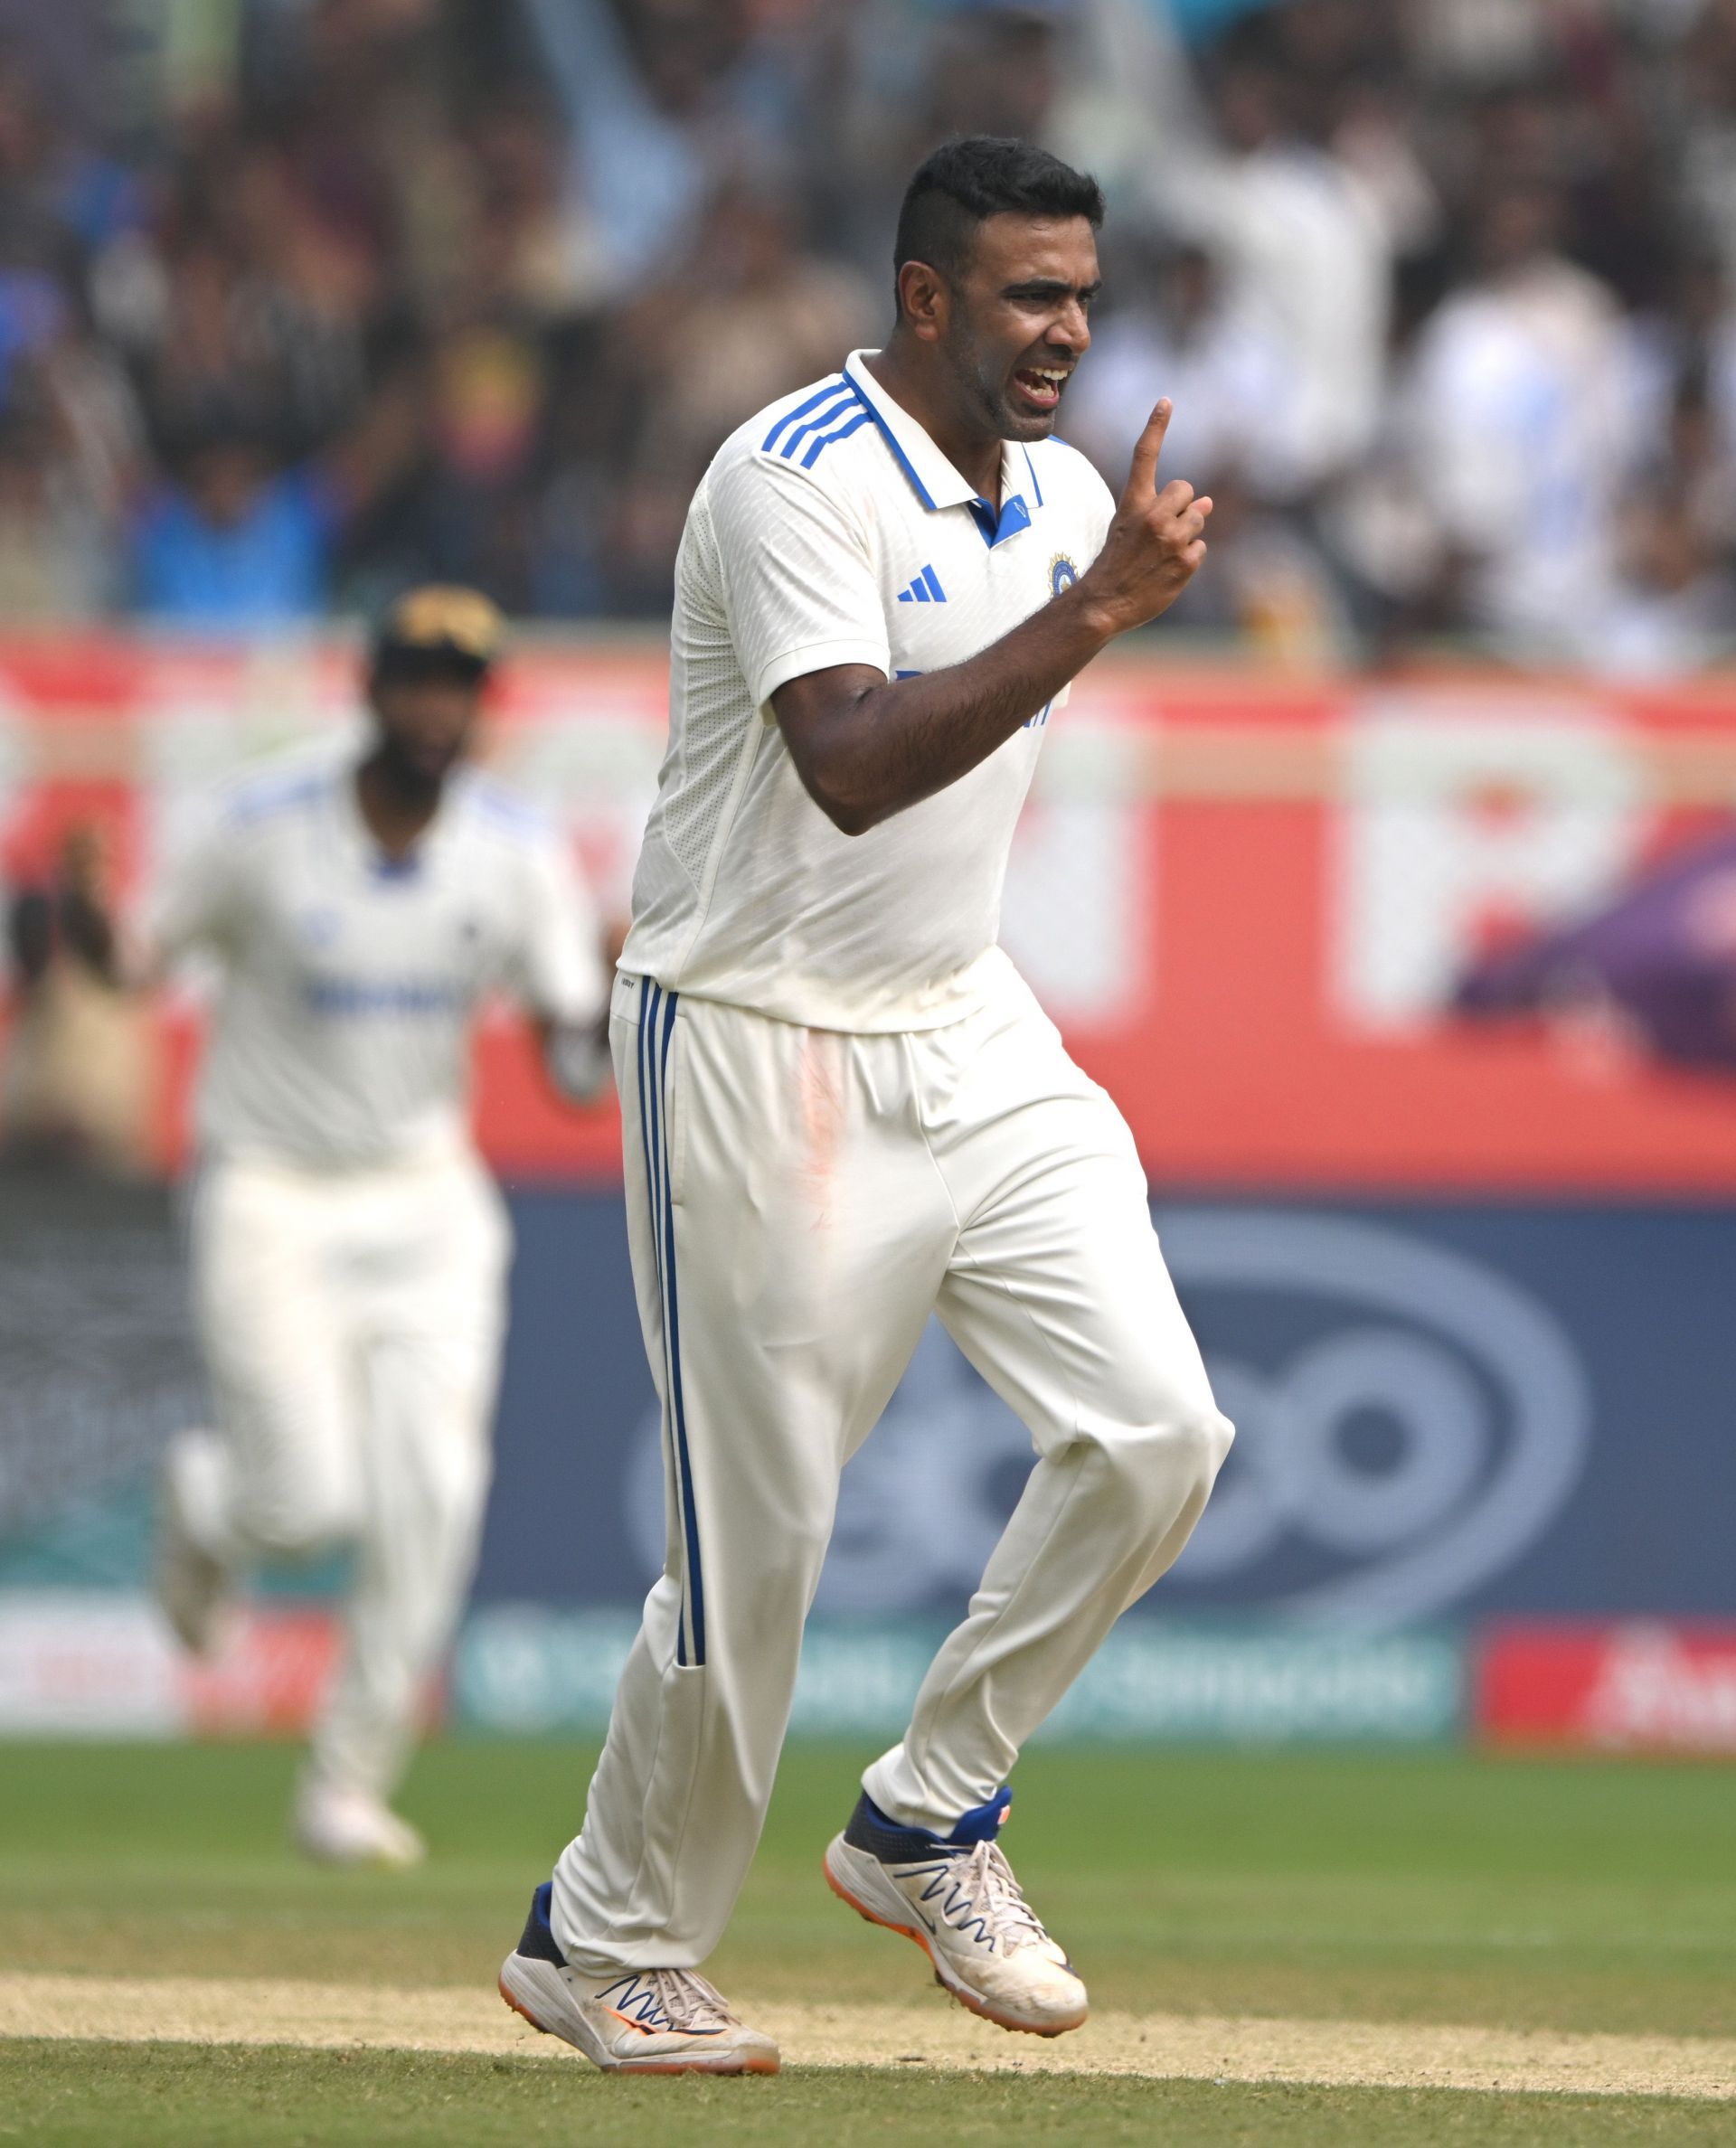 Ravichandran Ashwin took the prized scalps of Ollie Pope and Joe Root on Day 4 of the second Test.